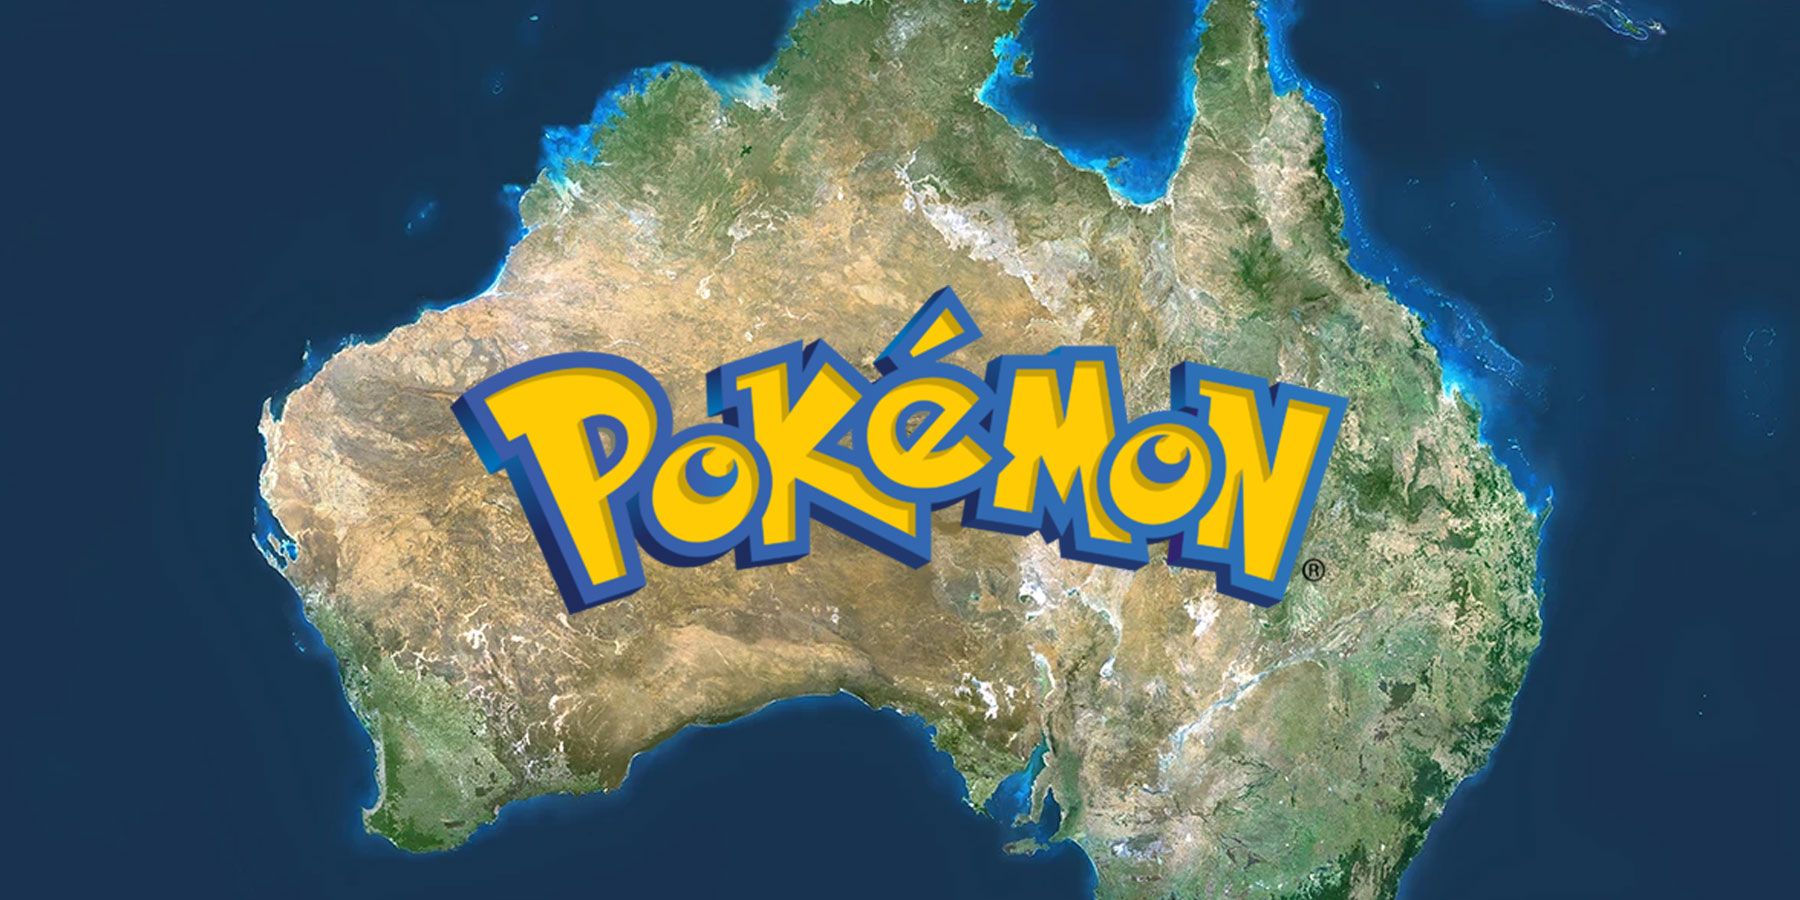 Australia Could Be the Perfect Setting for a New Pokemon Game